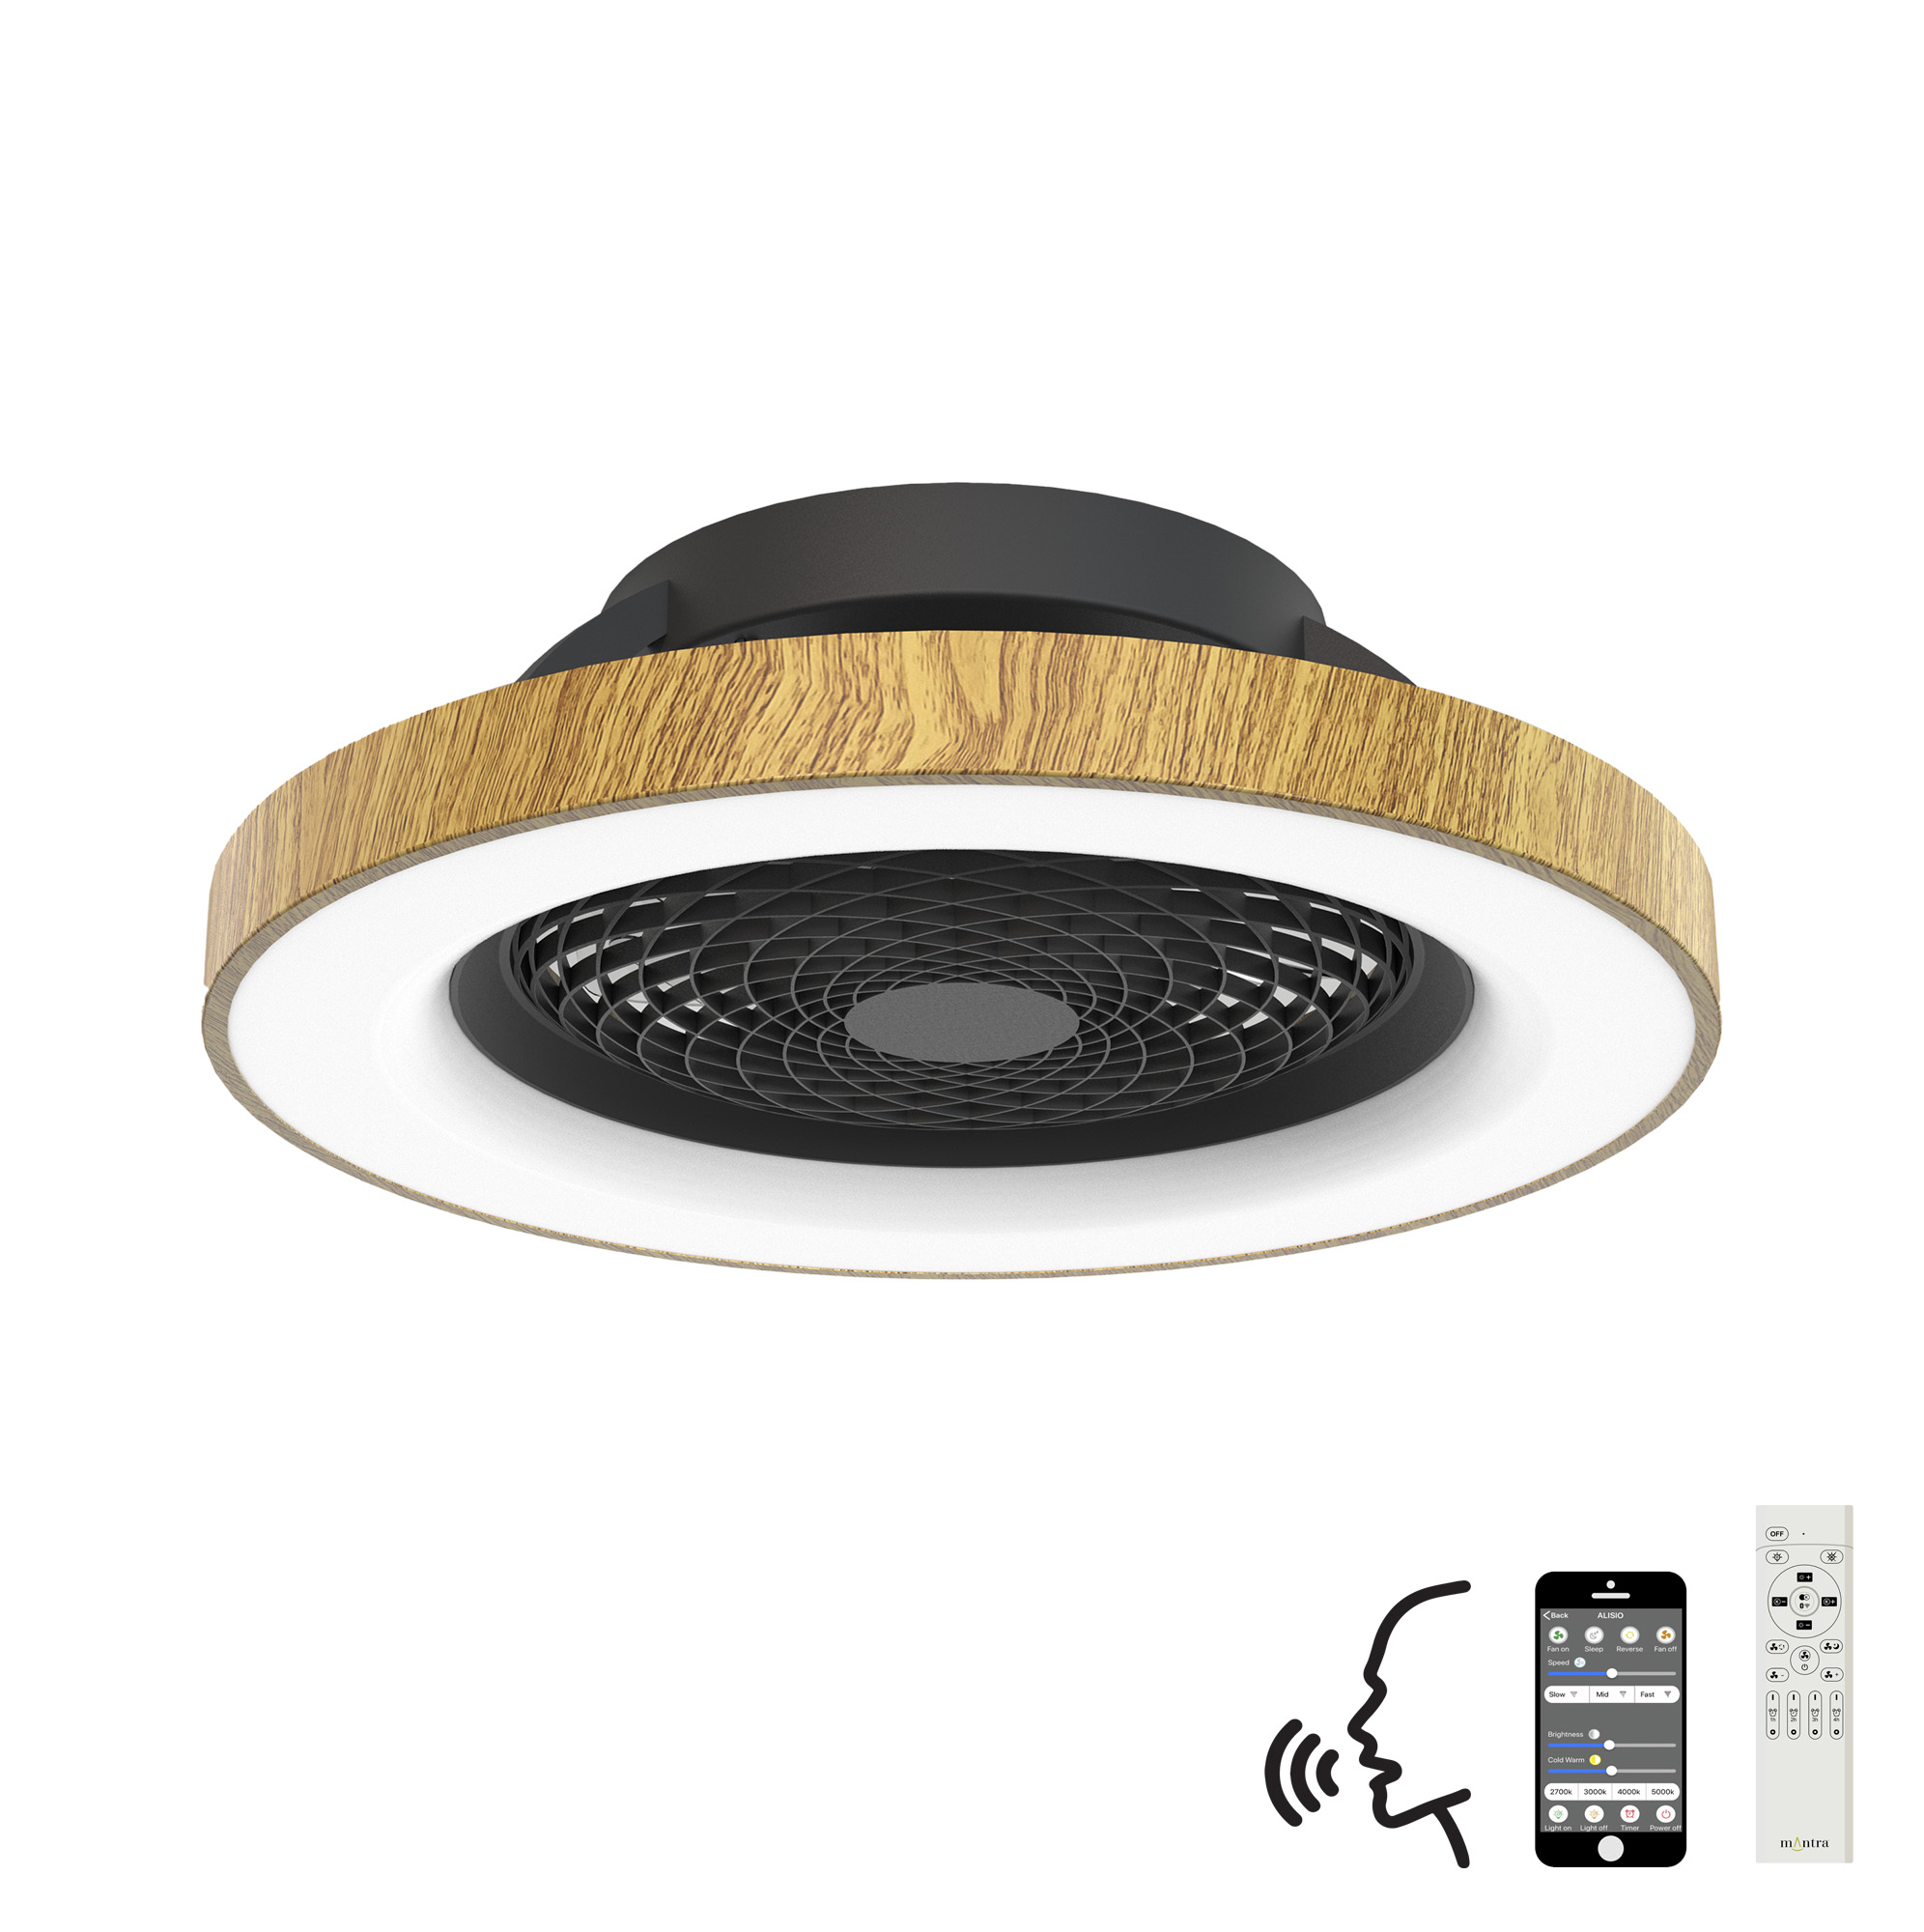 M7127  Tibet 70W LED Dimmable Ceiling Light & Fan; Remote / APP / Voice Controlled Wood Effect/Black